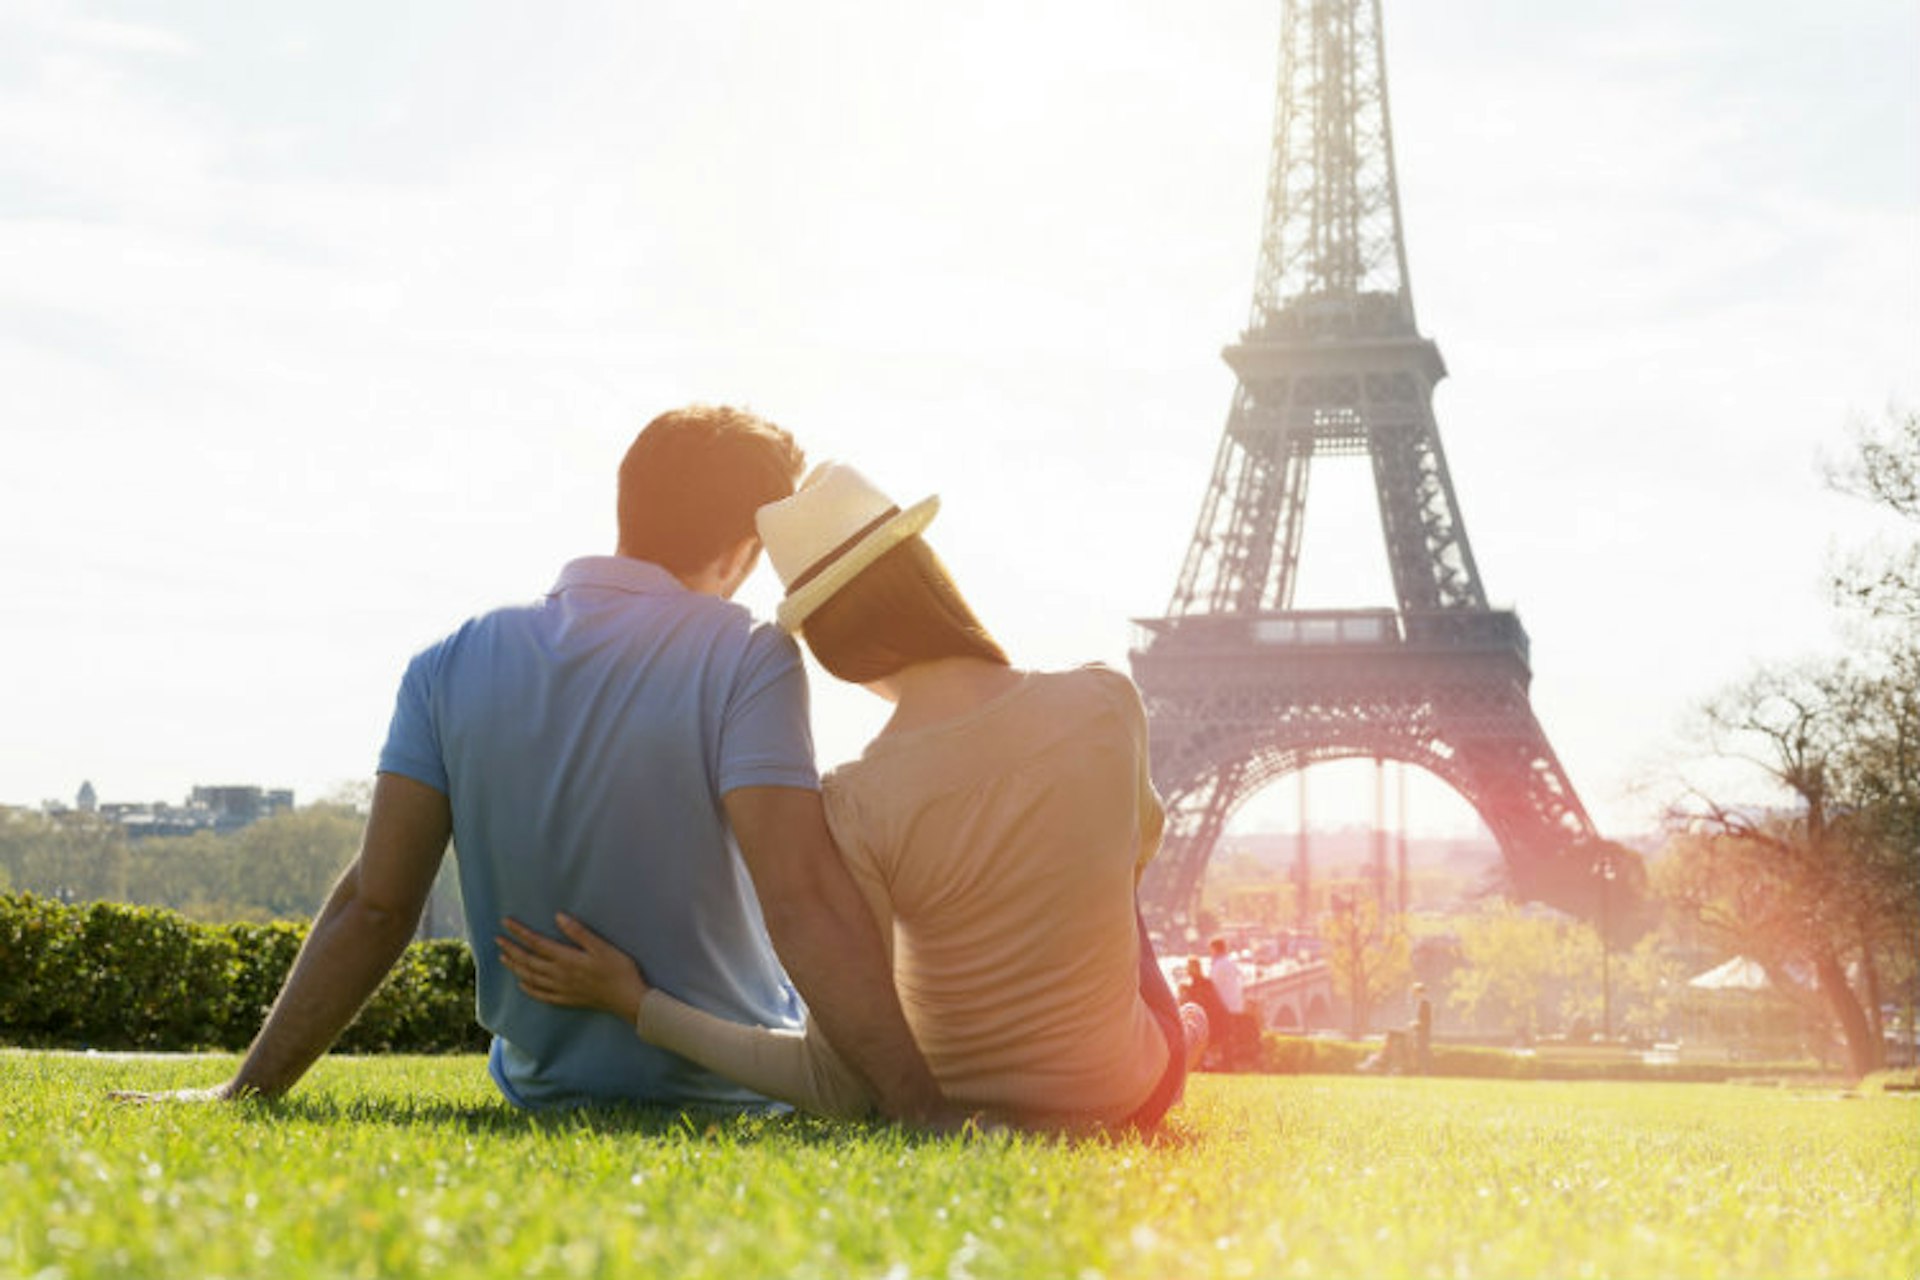 A couple sitting on grass overlooking the Eiffel Tower, Paris